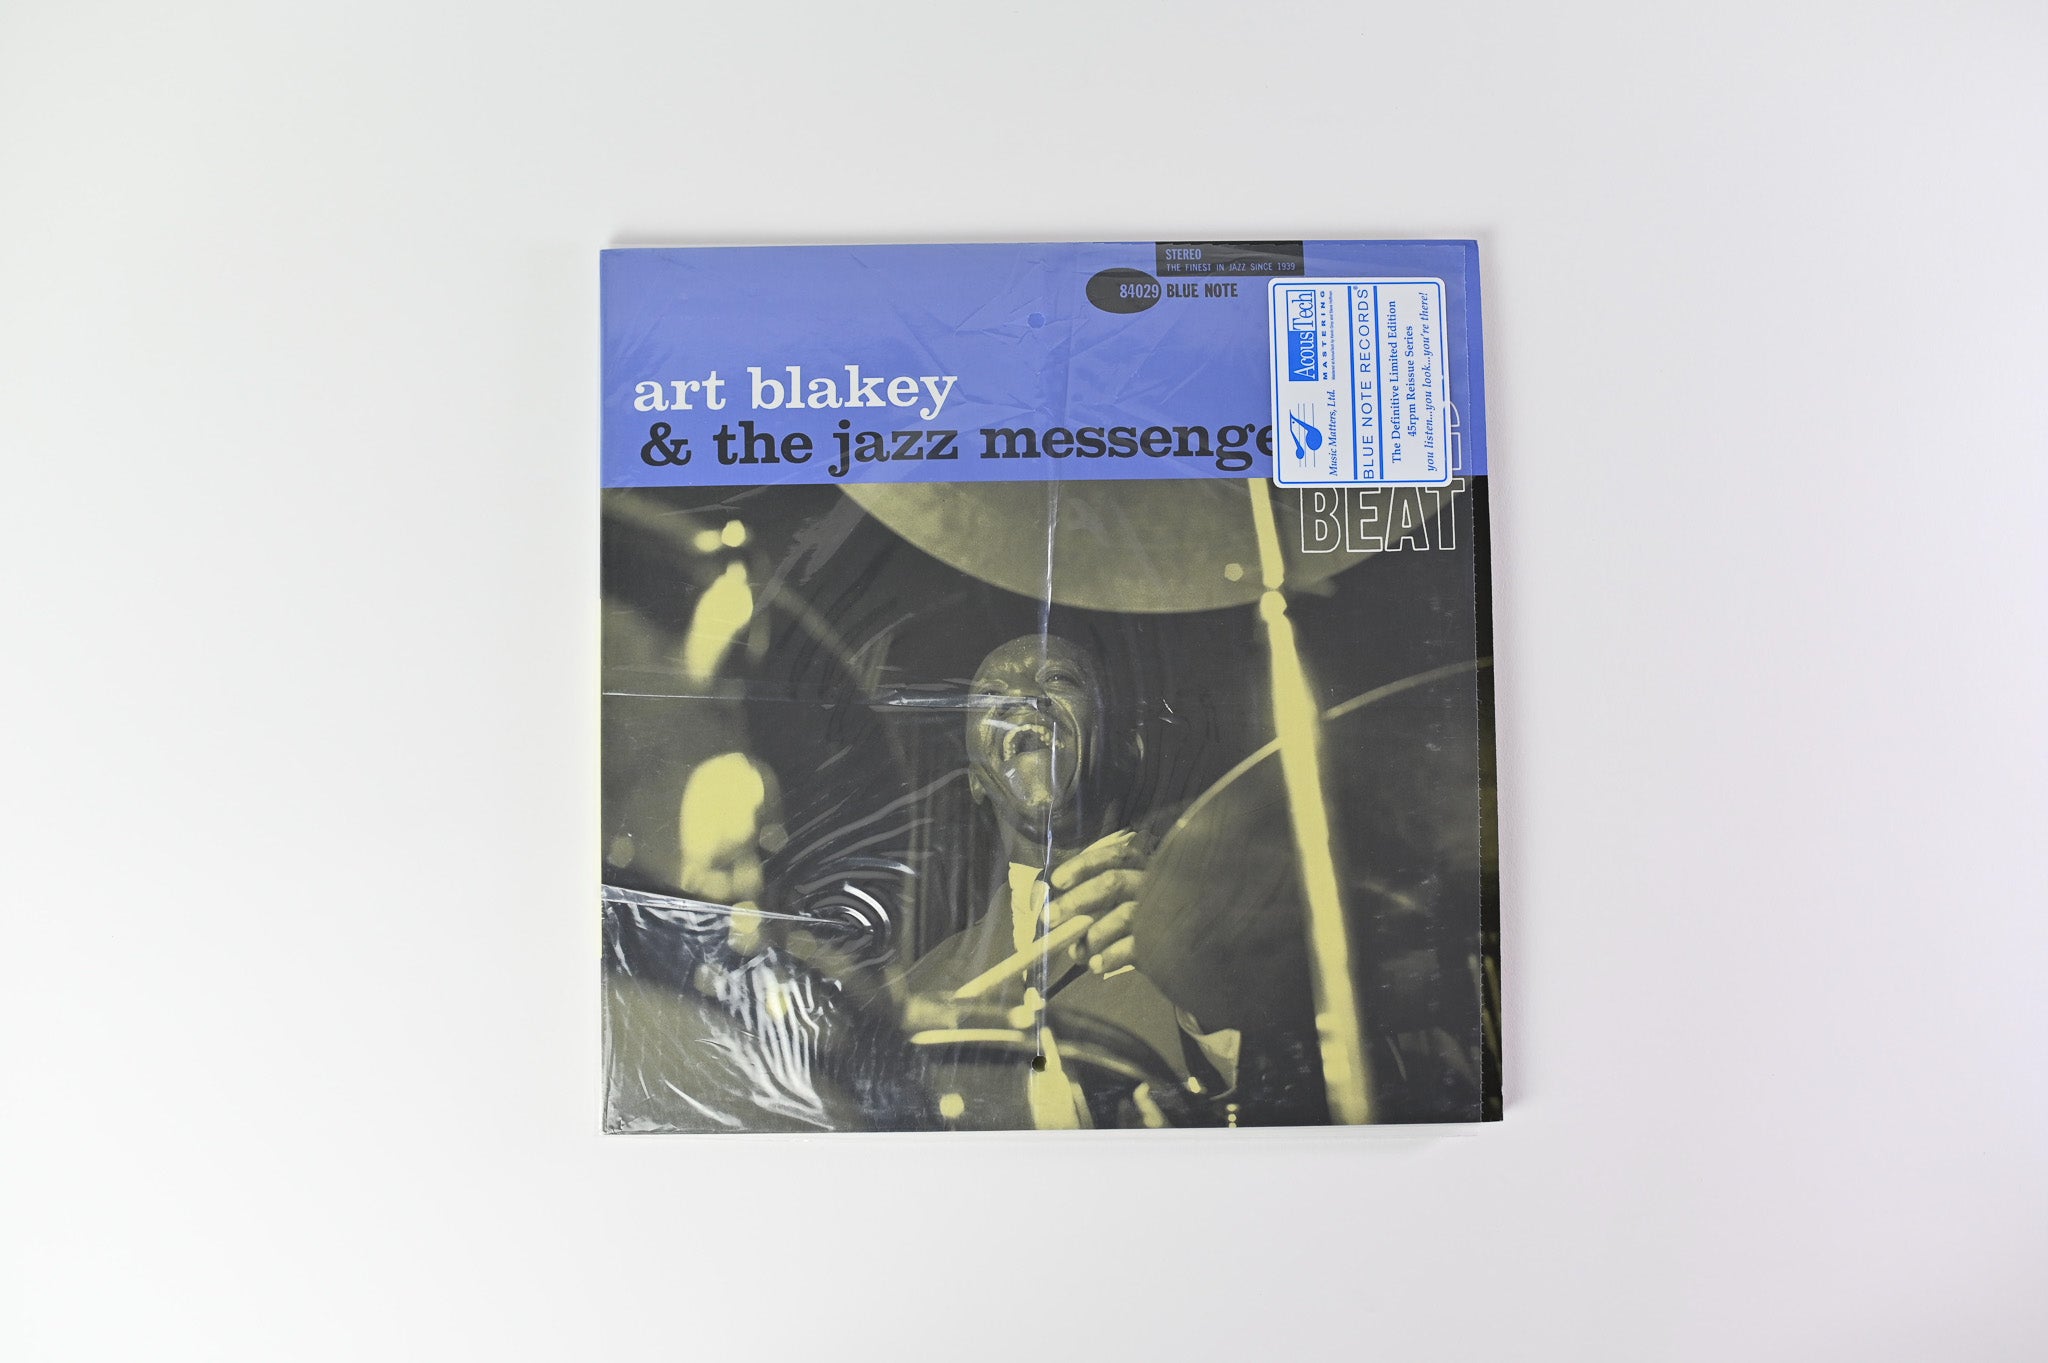 Art Blakey & The Jazz Messengers - The Big Beat on Blue Note Music Matters Ltd Reissue Numbered 45 RPM